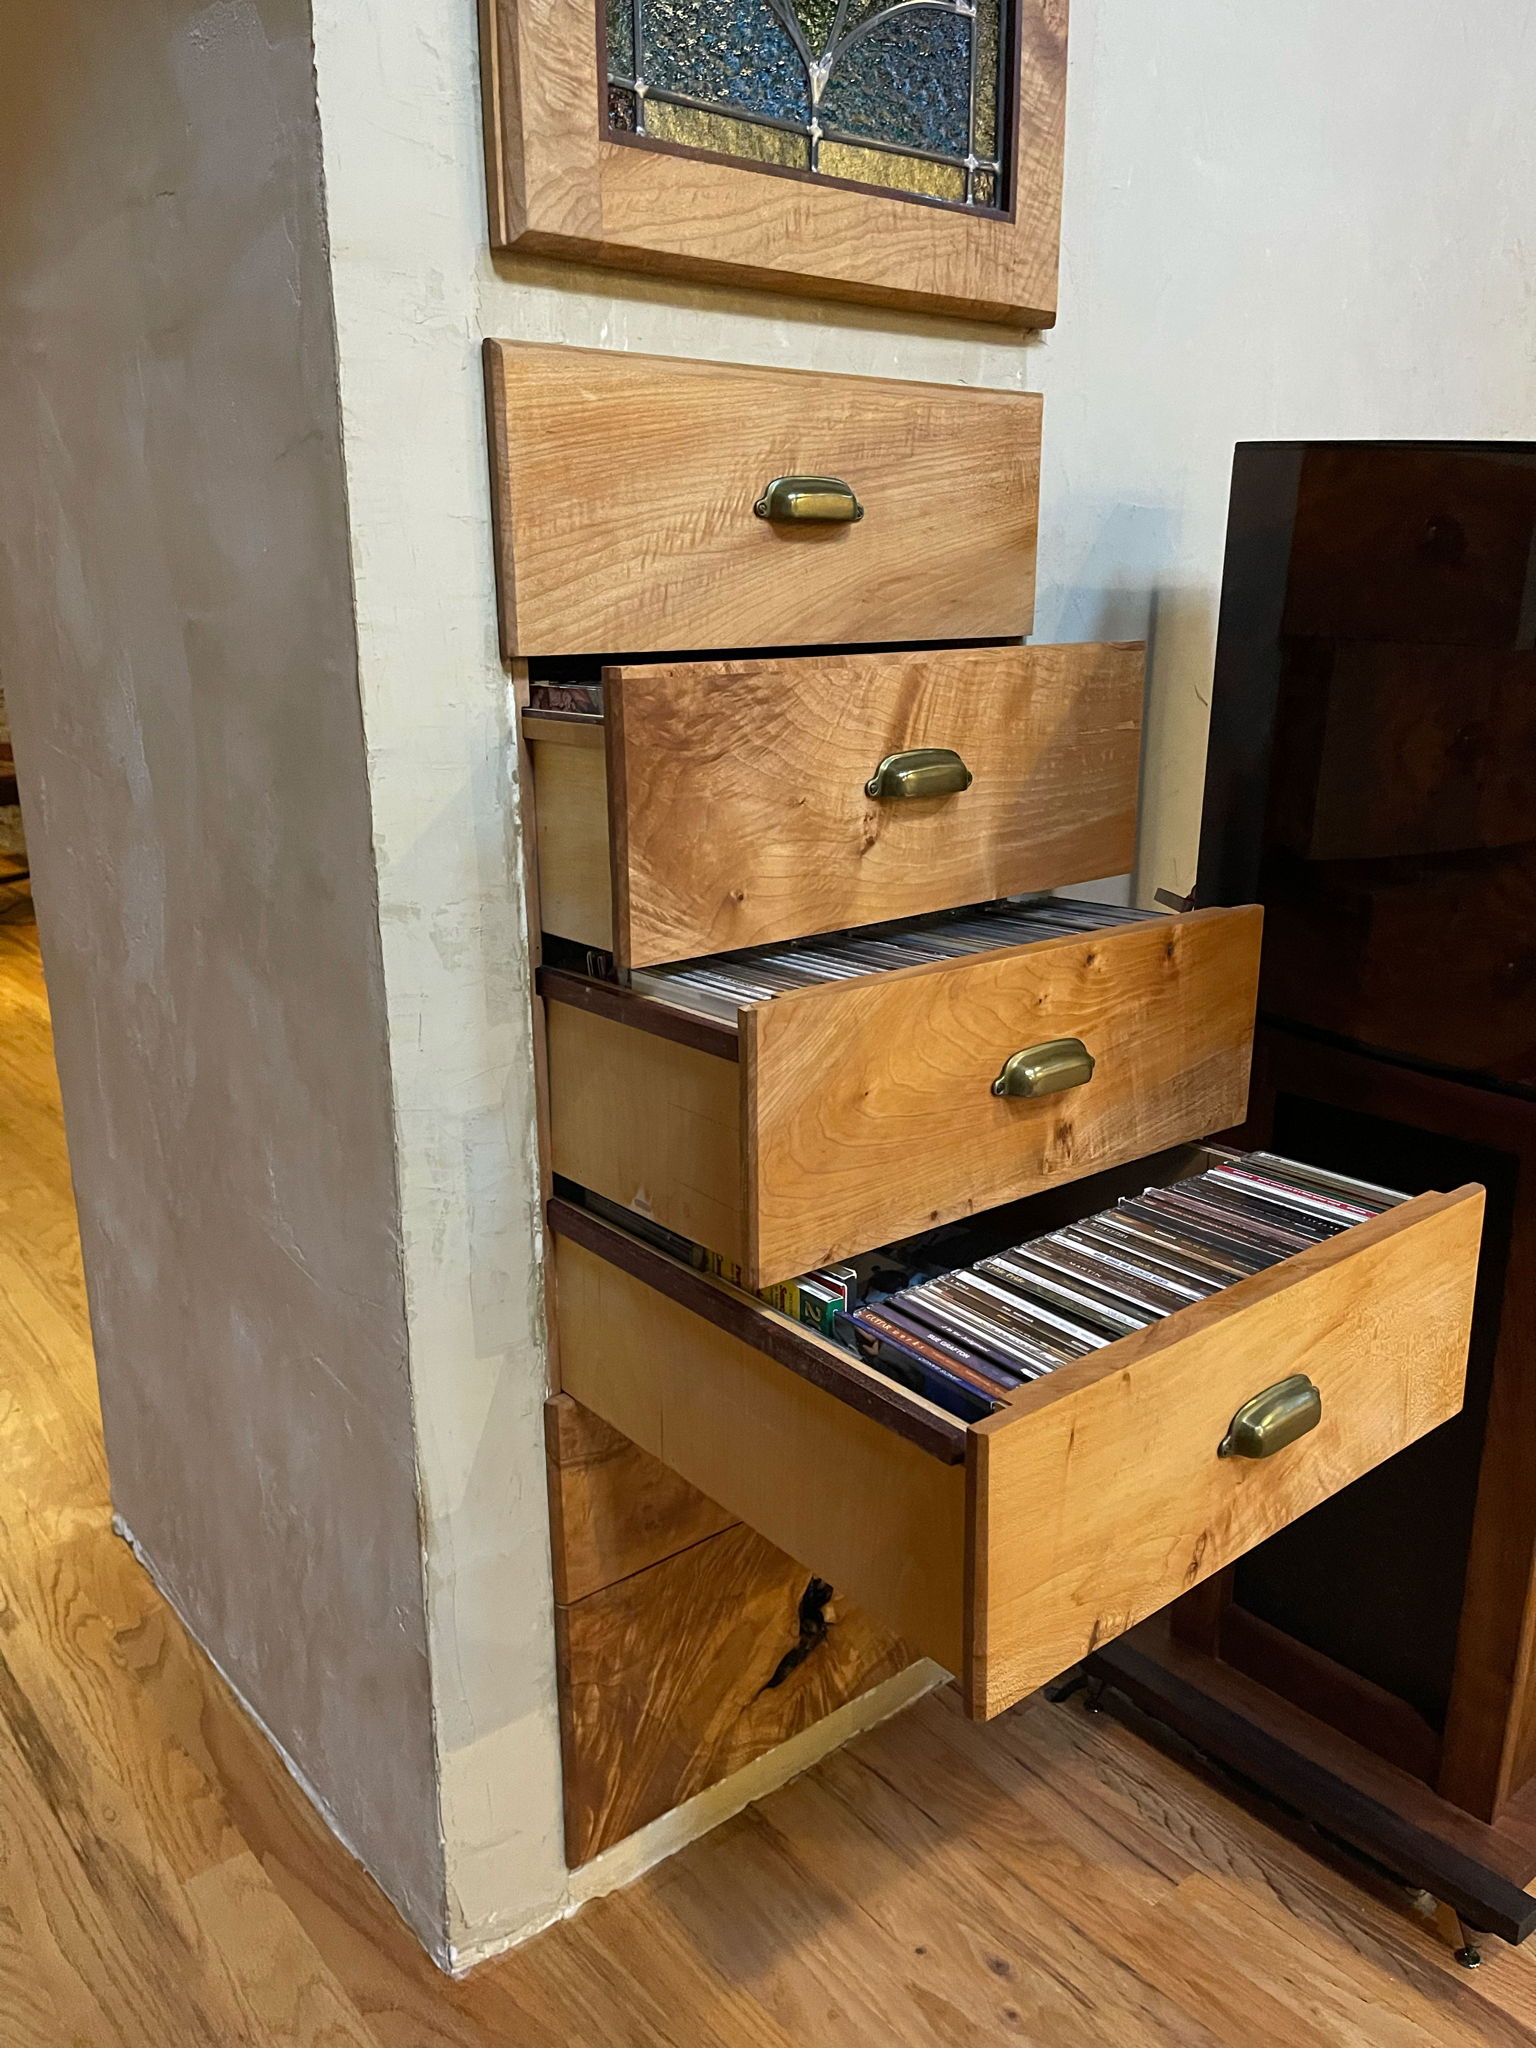 DIY built-in drawers for CD storage